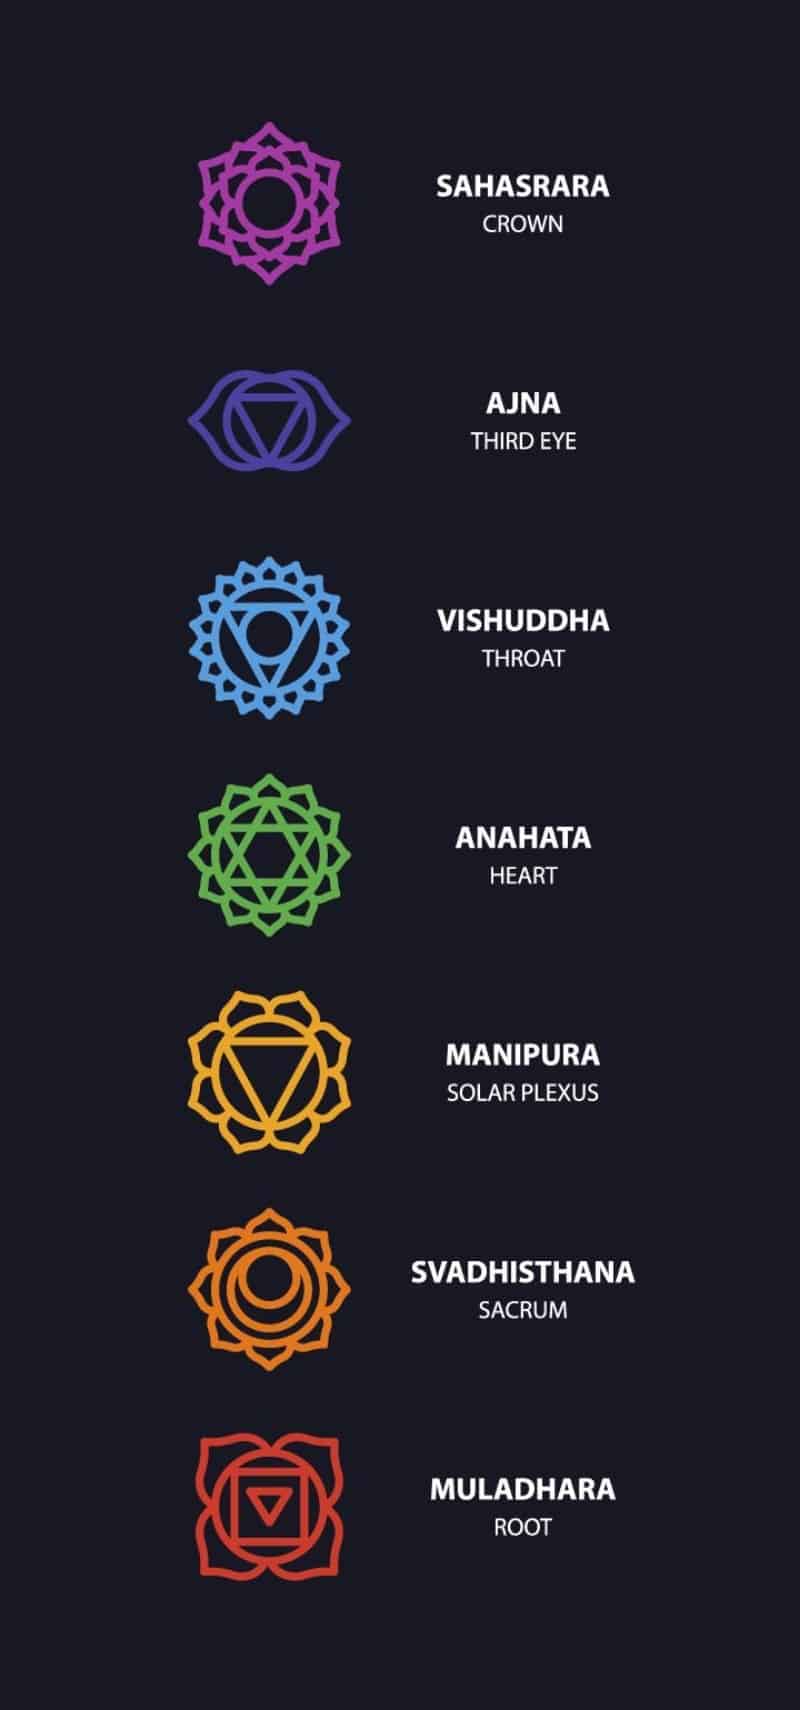 What are the colors of each chakra